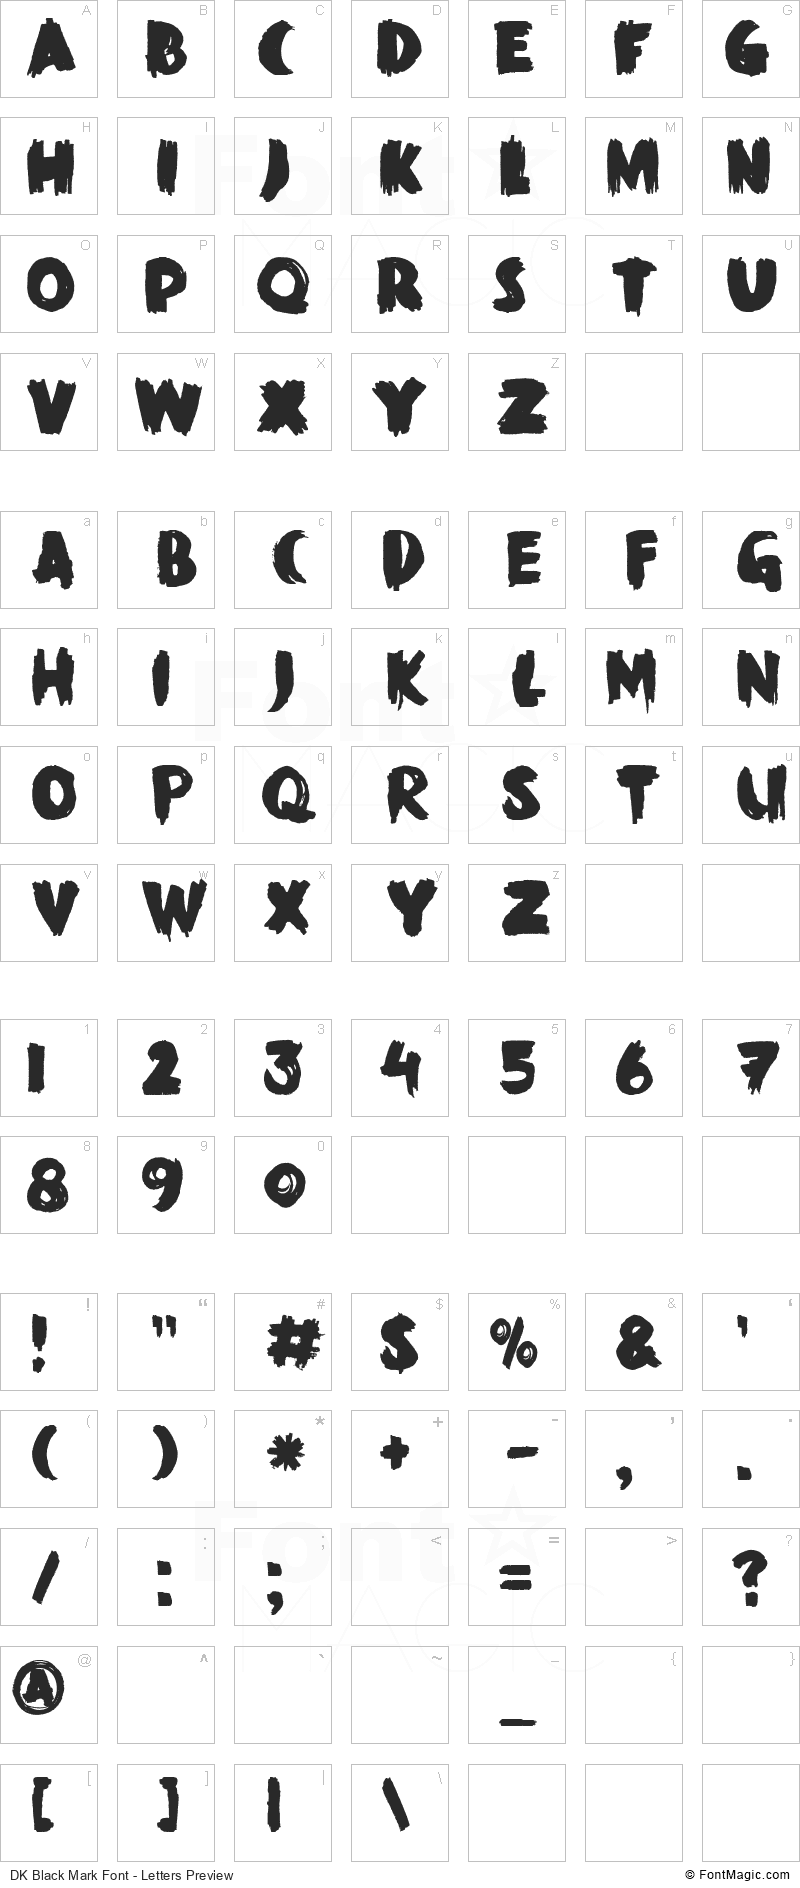 DK Black Mark Font - All Latters Preview Chart